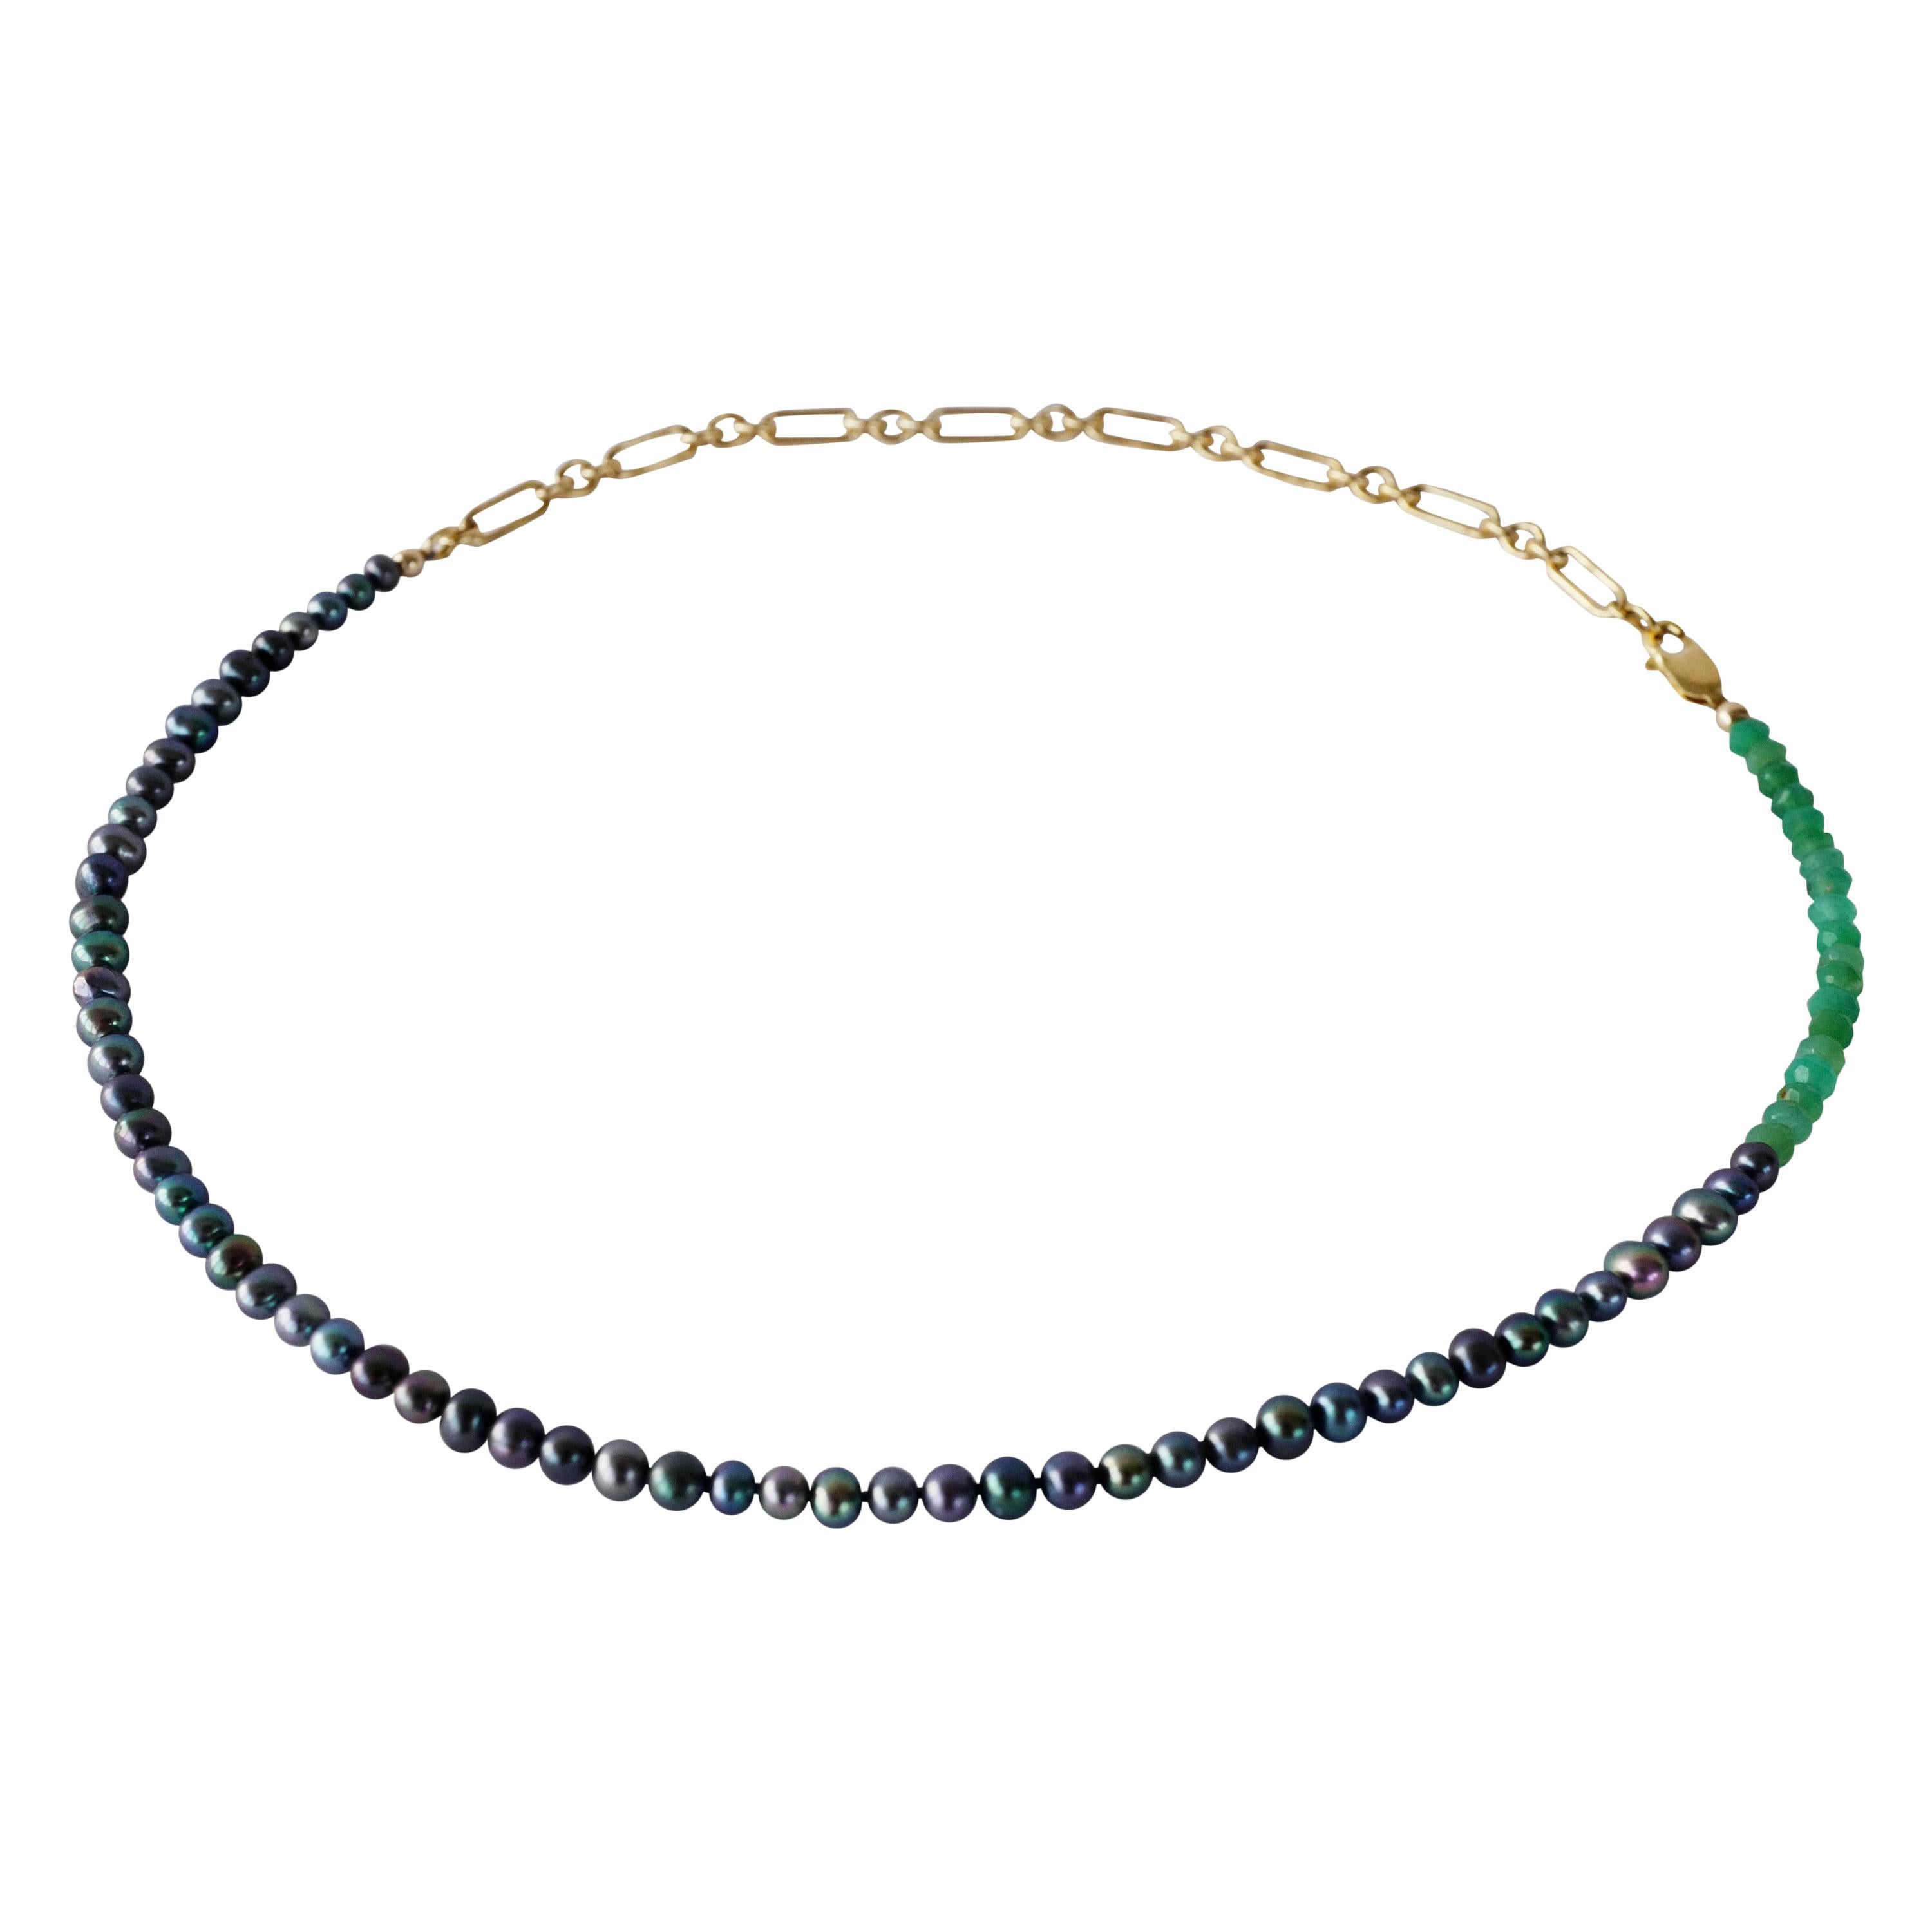 Black Pearl  Bead Choker Necklace Green Chrysoprase Gold Filled Chain J Dauphin